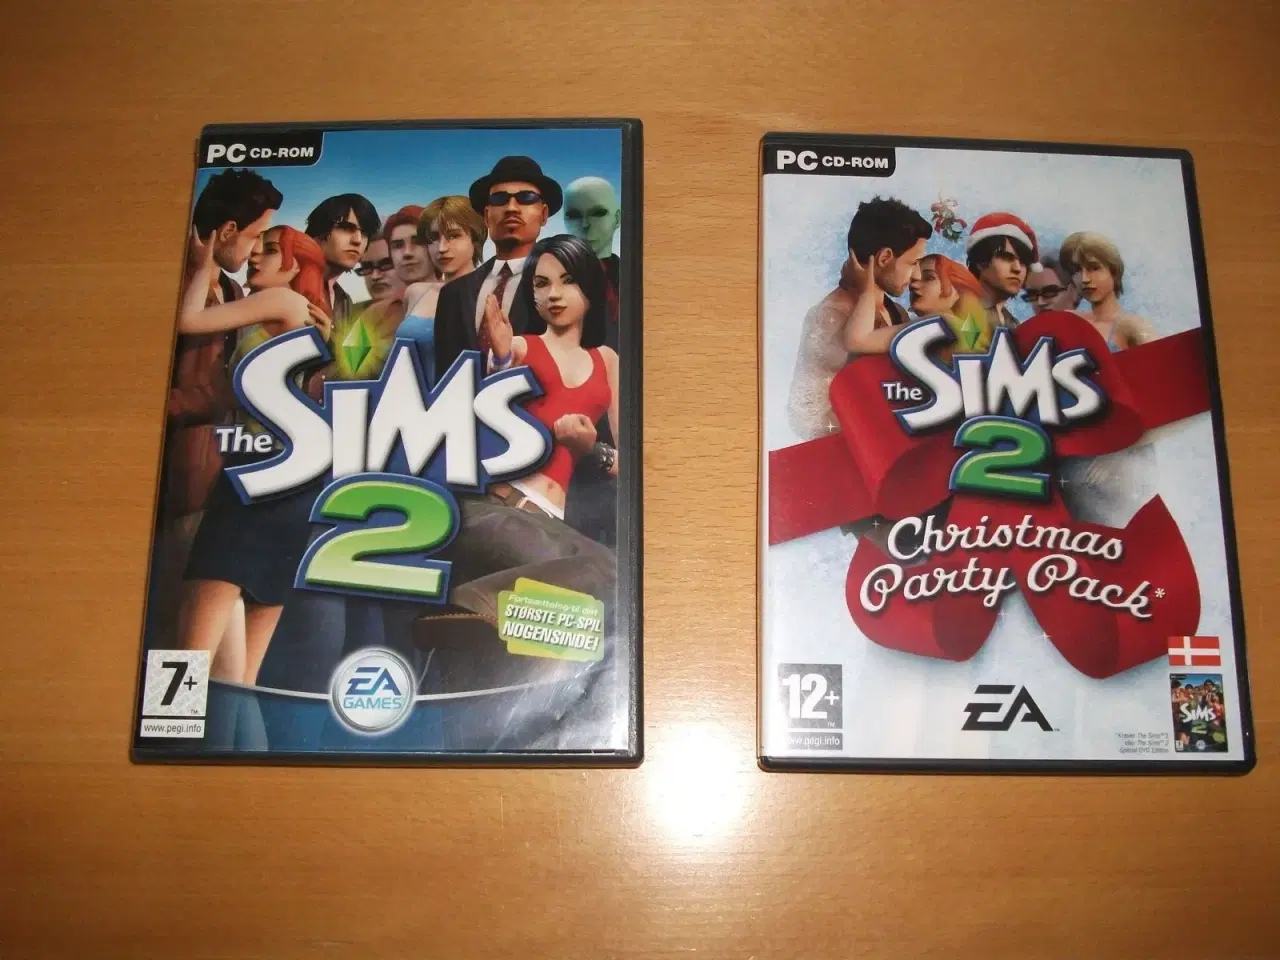 Billede 1 - The Sims 2